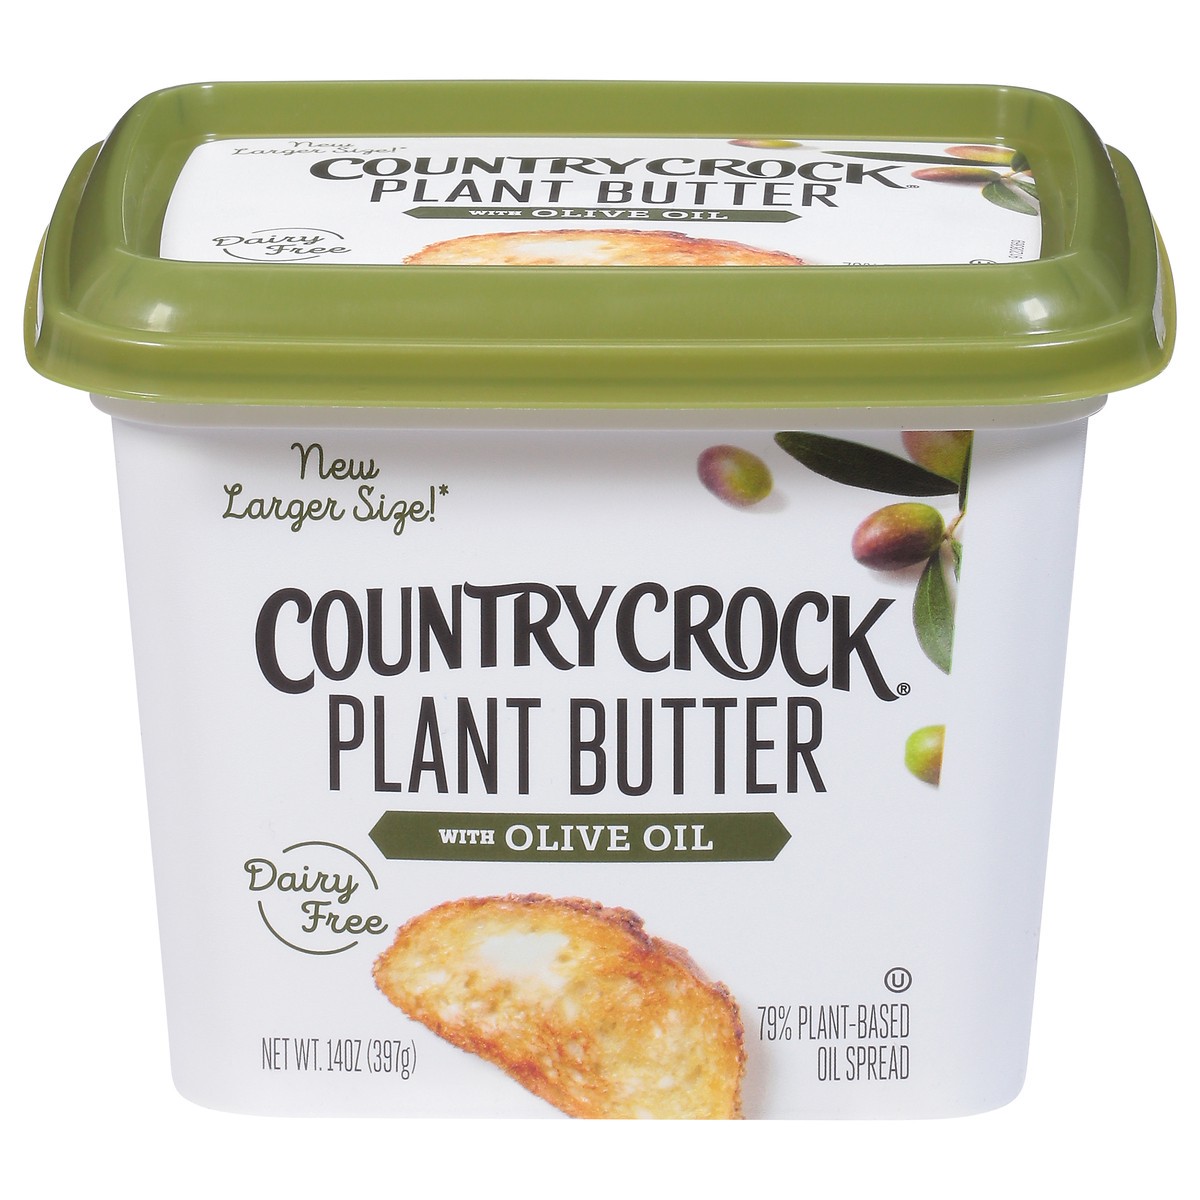 Country Crock Plant Butter with Olive Oil, 14 oz Tub (Refrigerated) - image 5 of 8